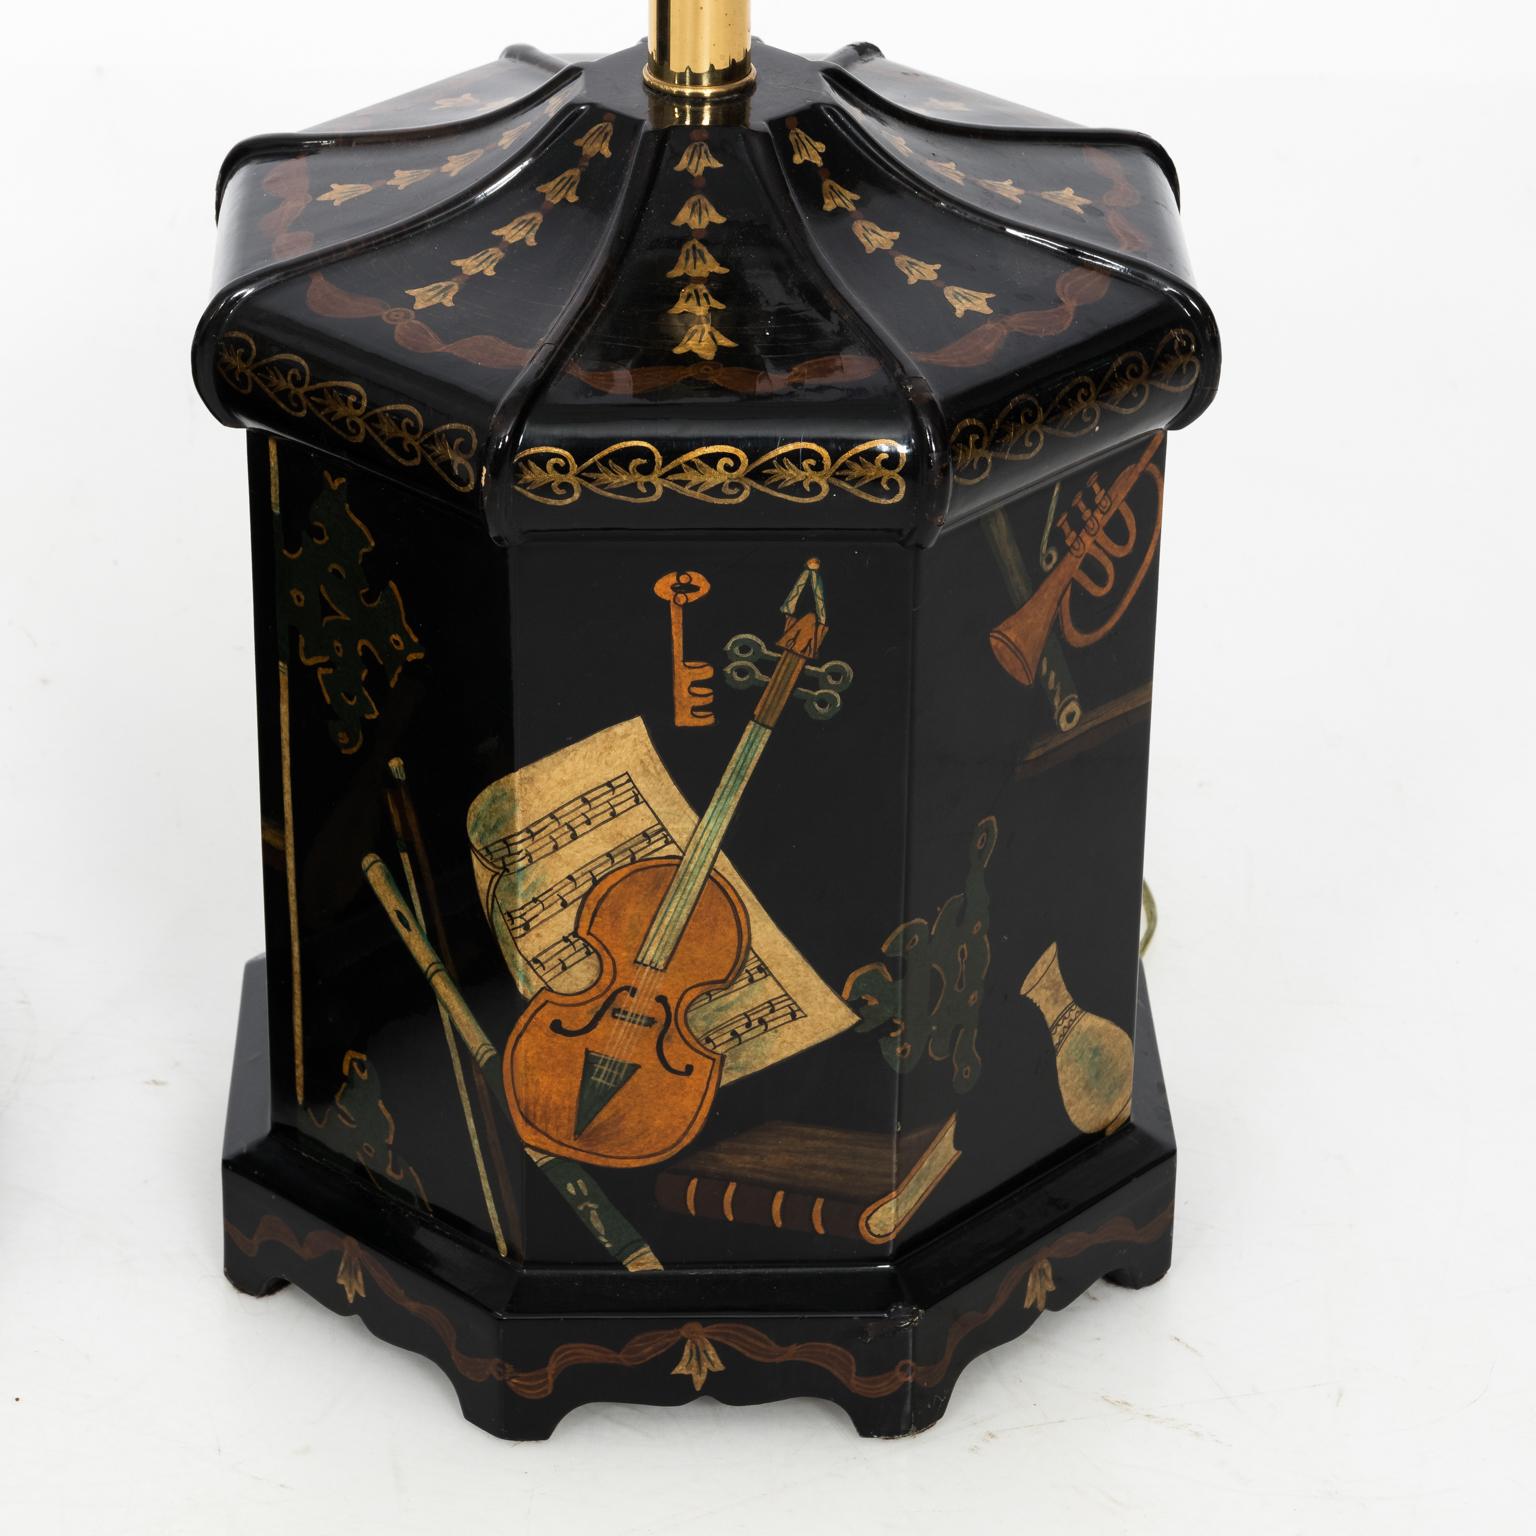 Pair of Vintage Papier-Mache Black Lacquer Sarreid Lamps with painted musical instruments and sheet music, circa mid-20th century. The lamps are in an octagonal shape with the original label on the bottom. Please note of wear with age including